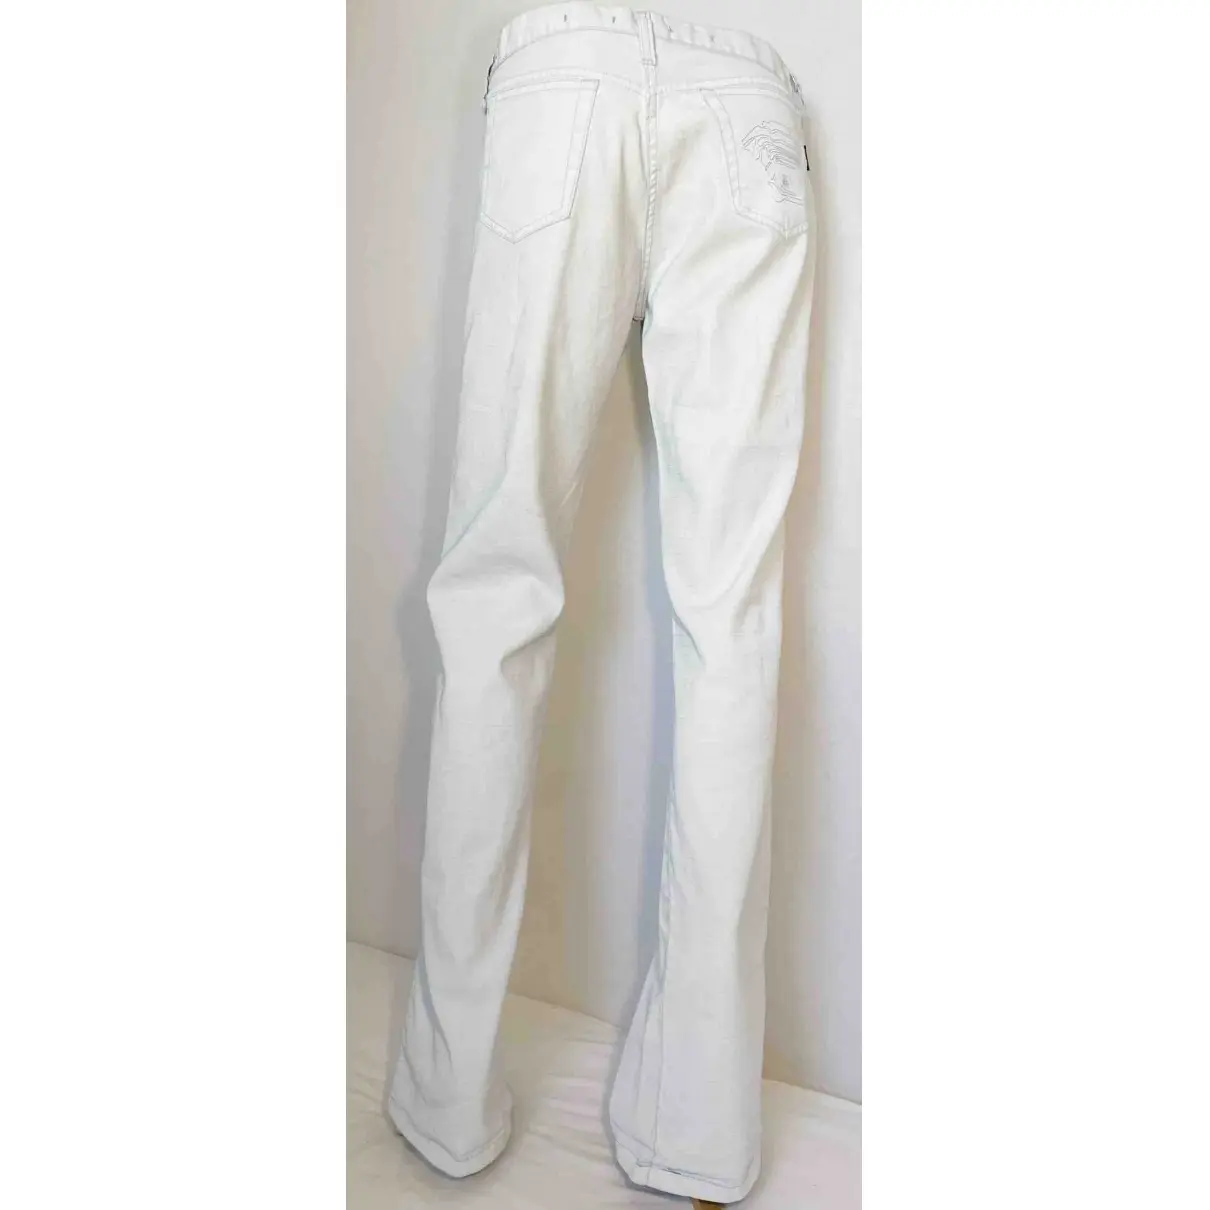 Buy Versace White Cotton Jeans online